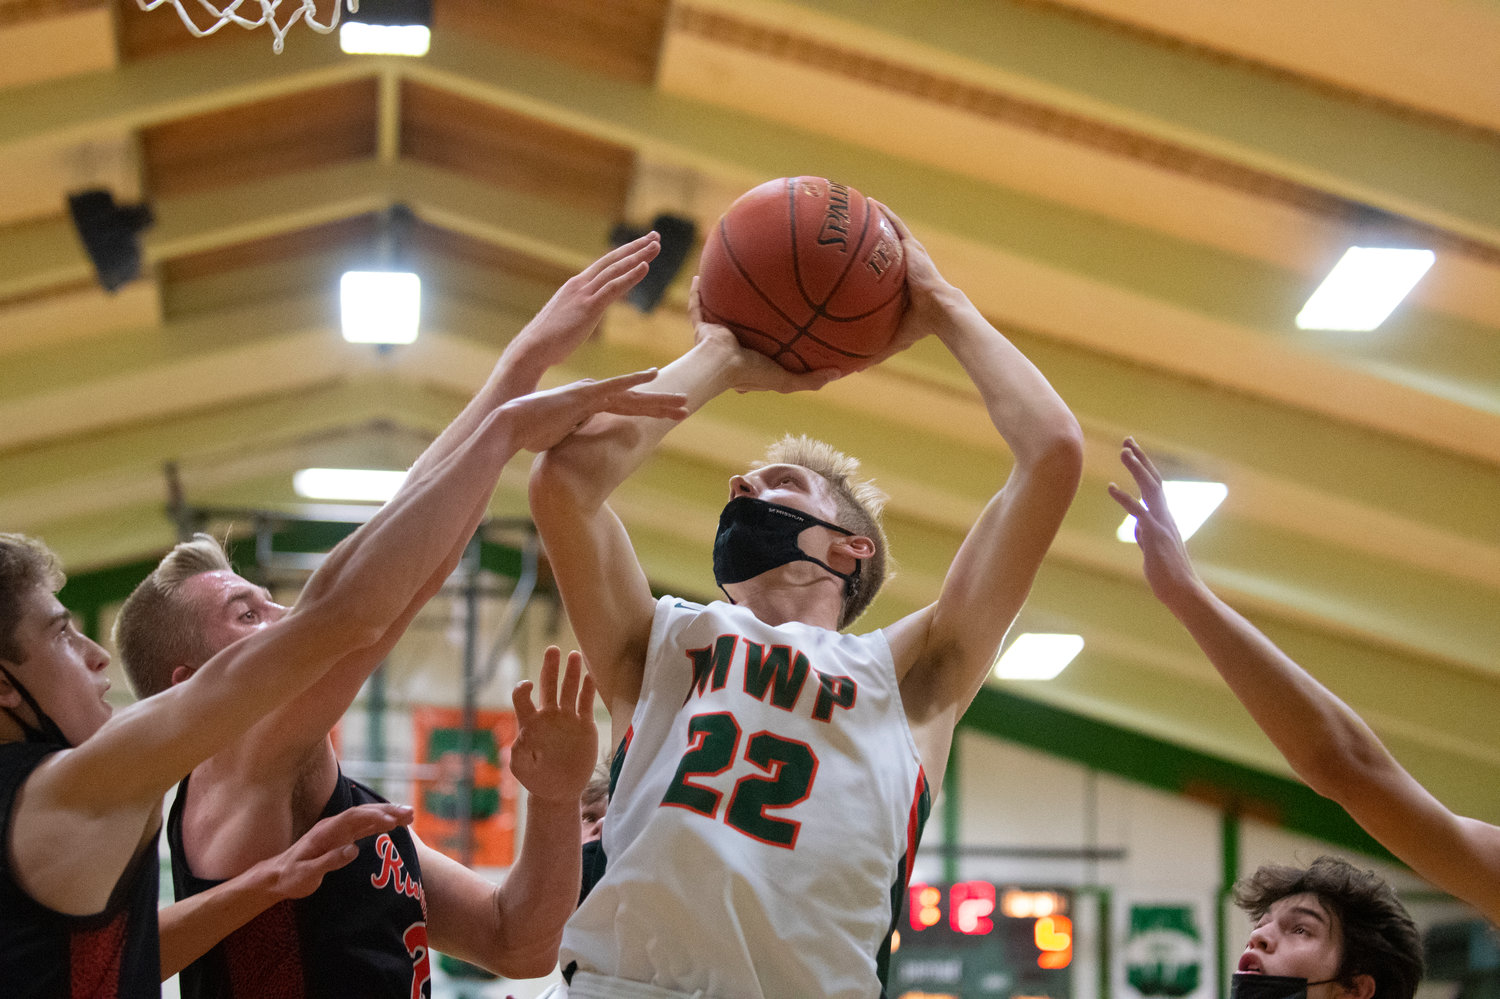 MWP junior Gary Dotson (22) goes up for two points against three Rainier defenders in Morton on Wednesday.